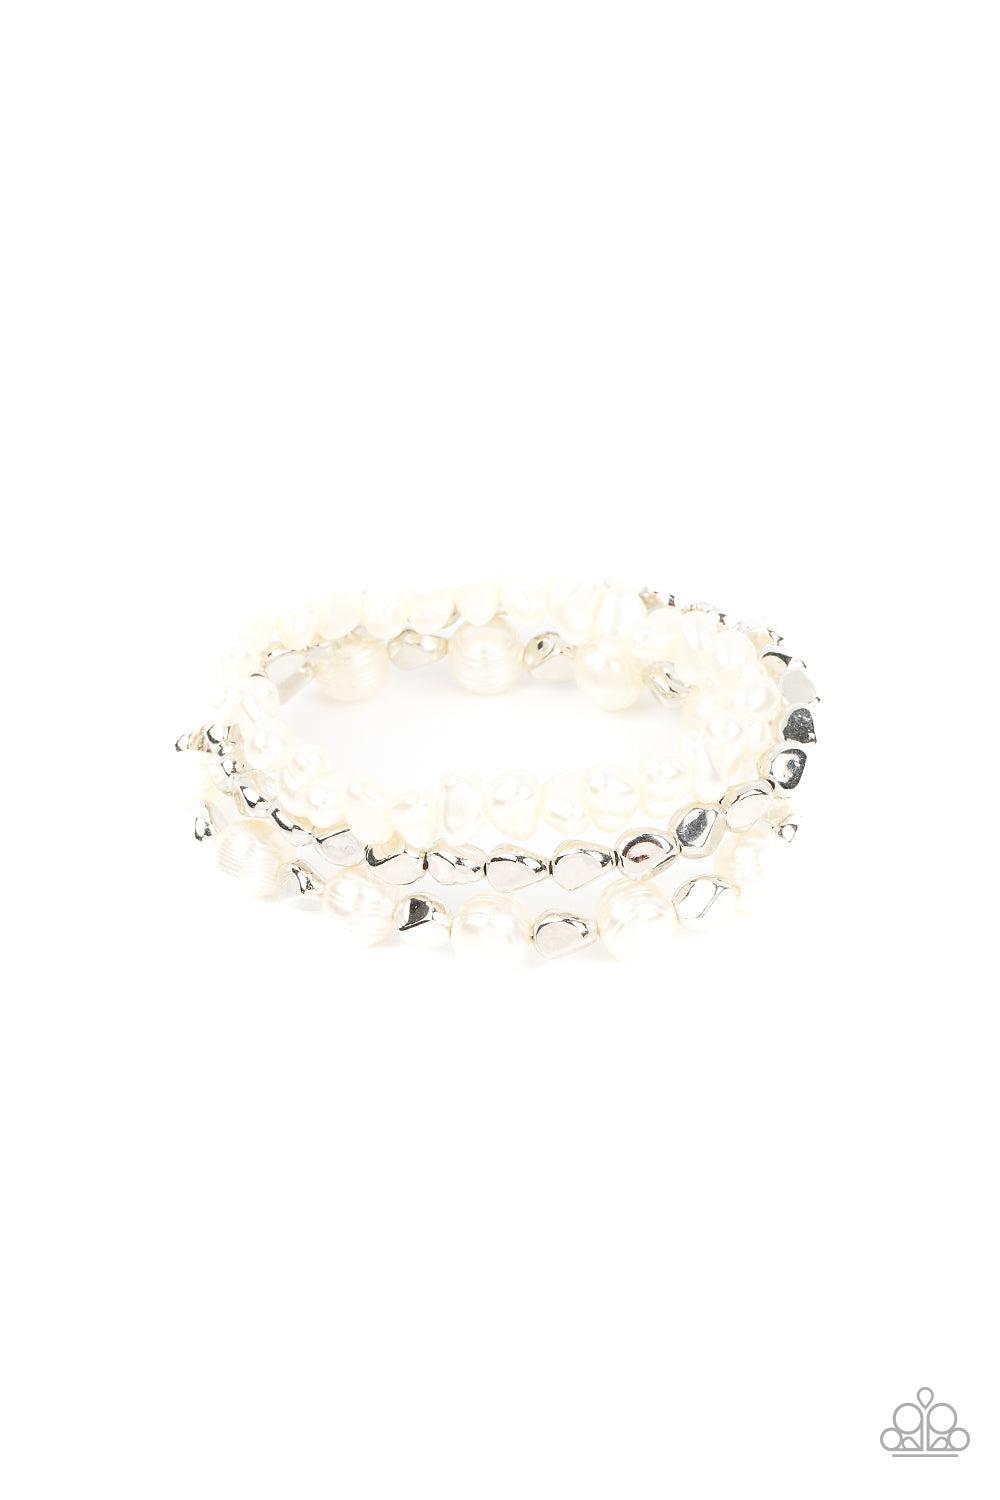 Shoreside Soiree White Pearl Bracelet - Paparazzi Accessories- lightbox - CarasShop.com - $5 Jewelry by Cara Jewels